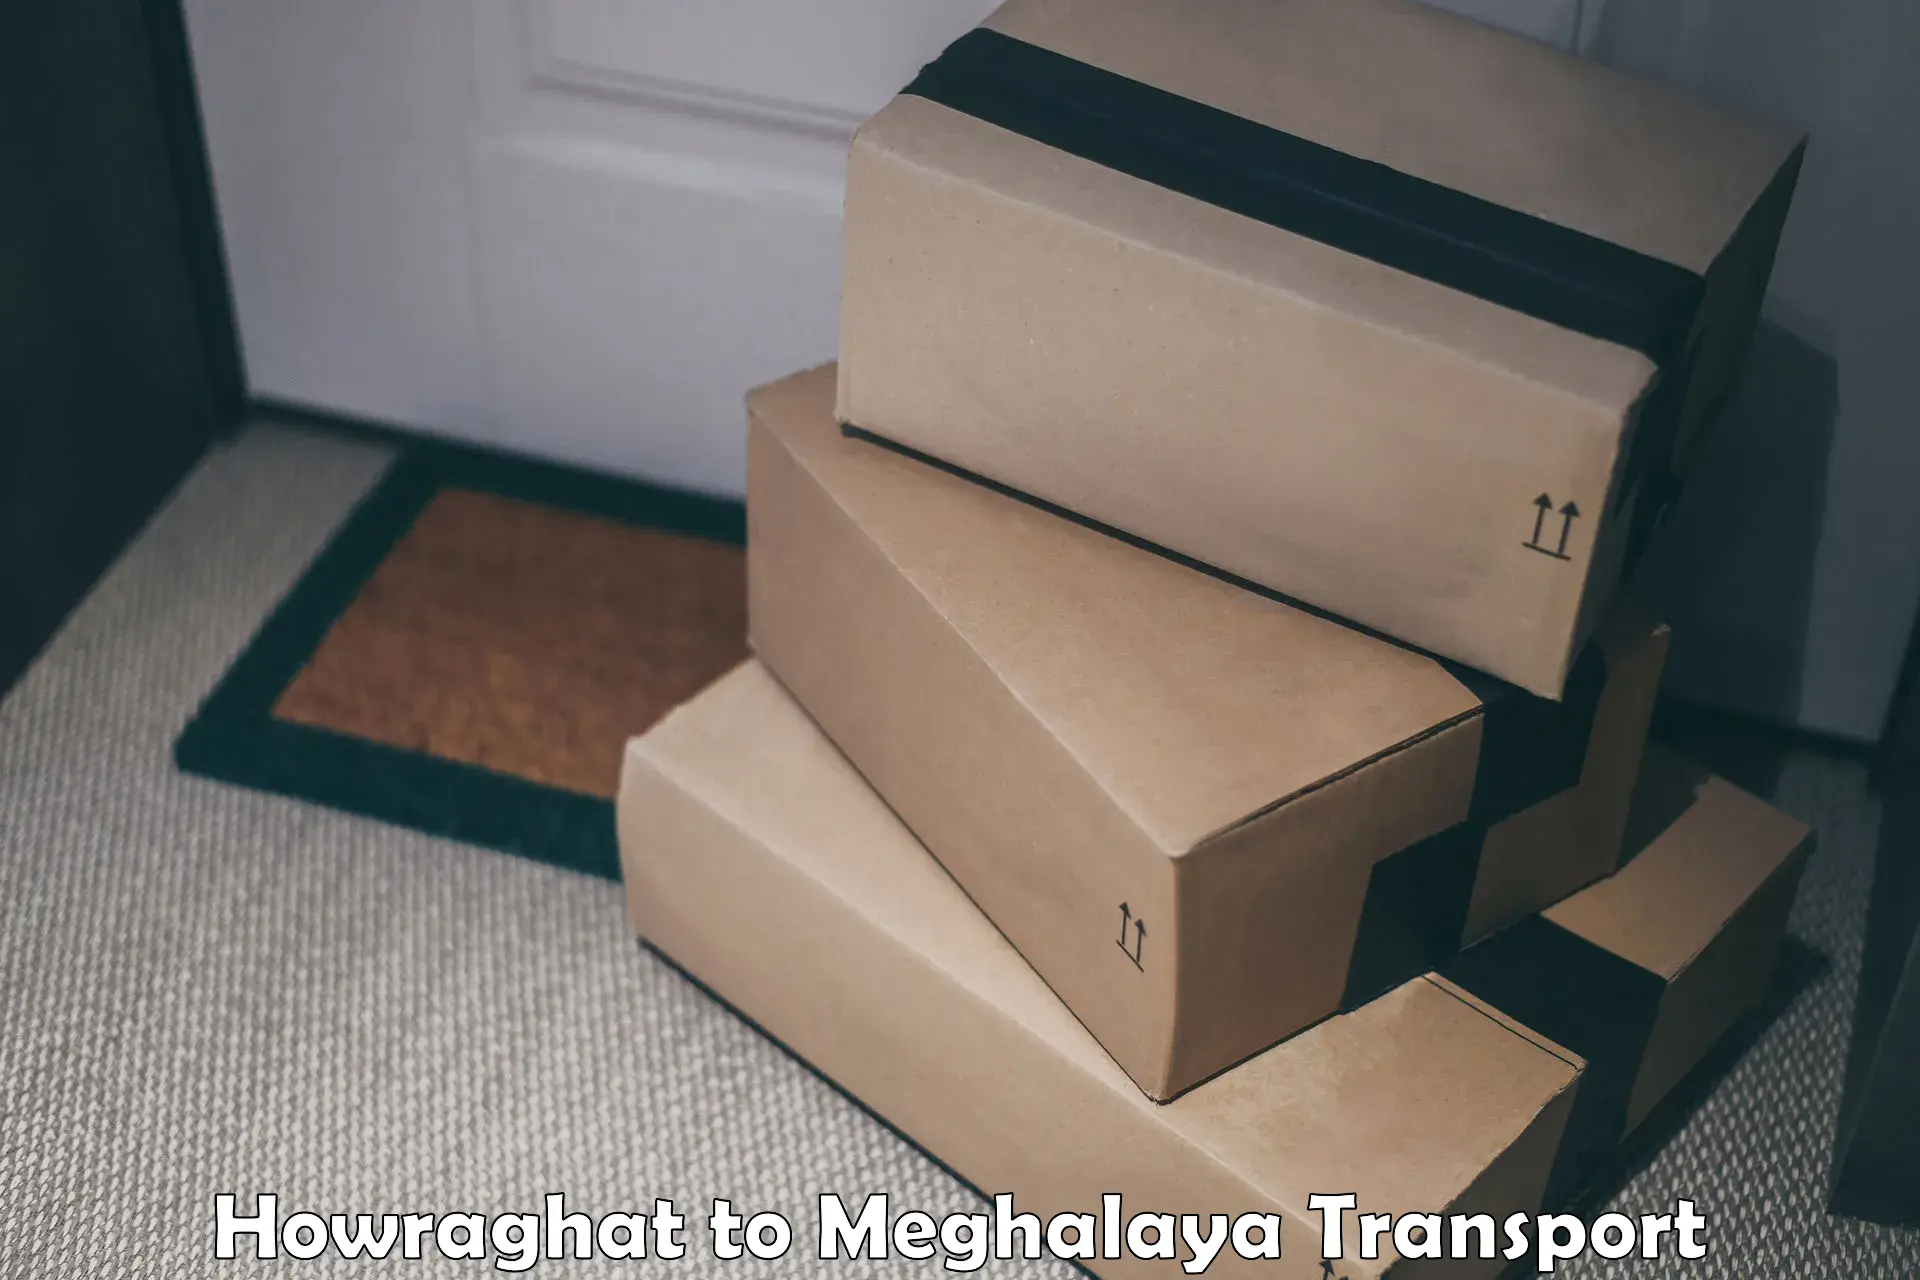 Road transport online services Howraghat to Meghalaya